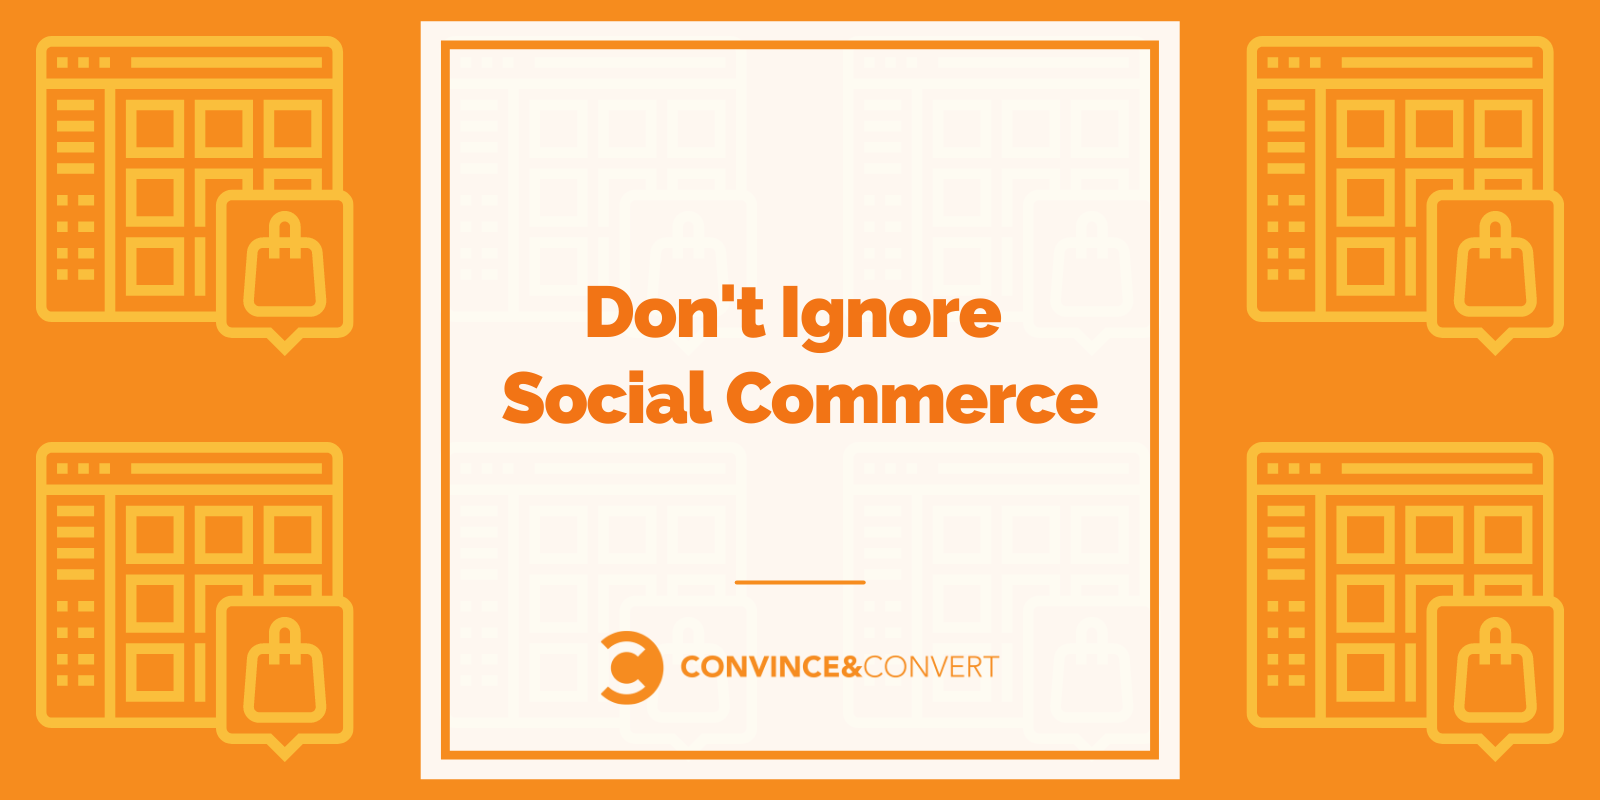 Kind now not Ignore Social Commerce